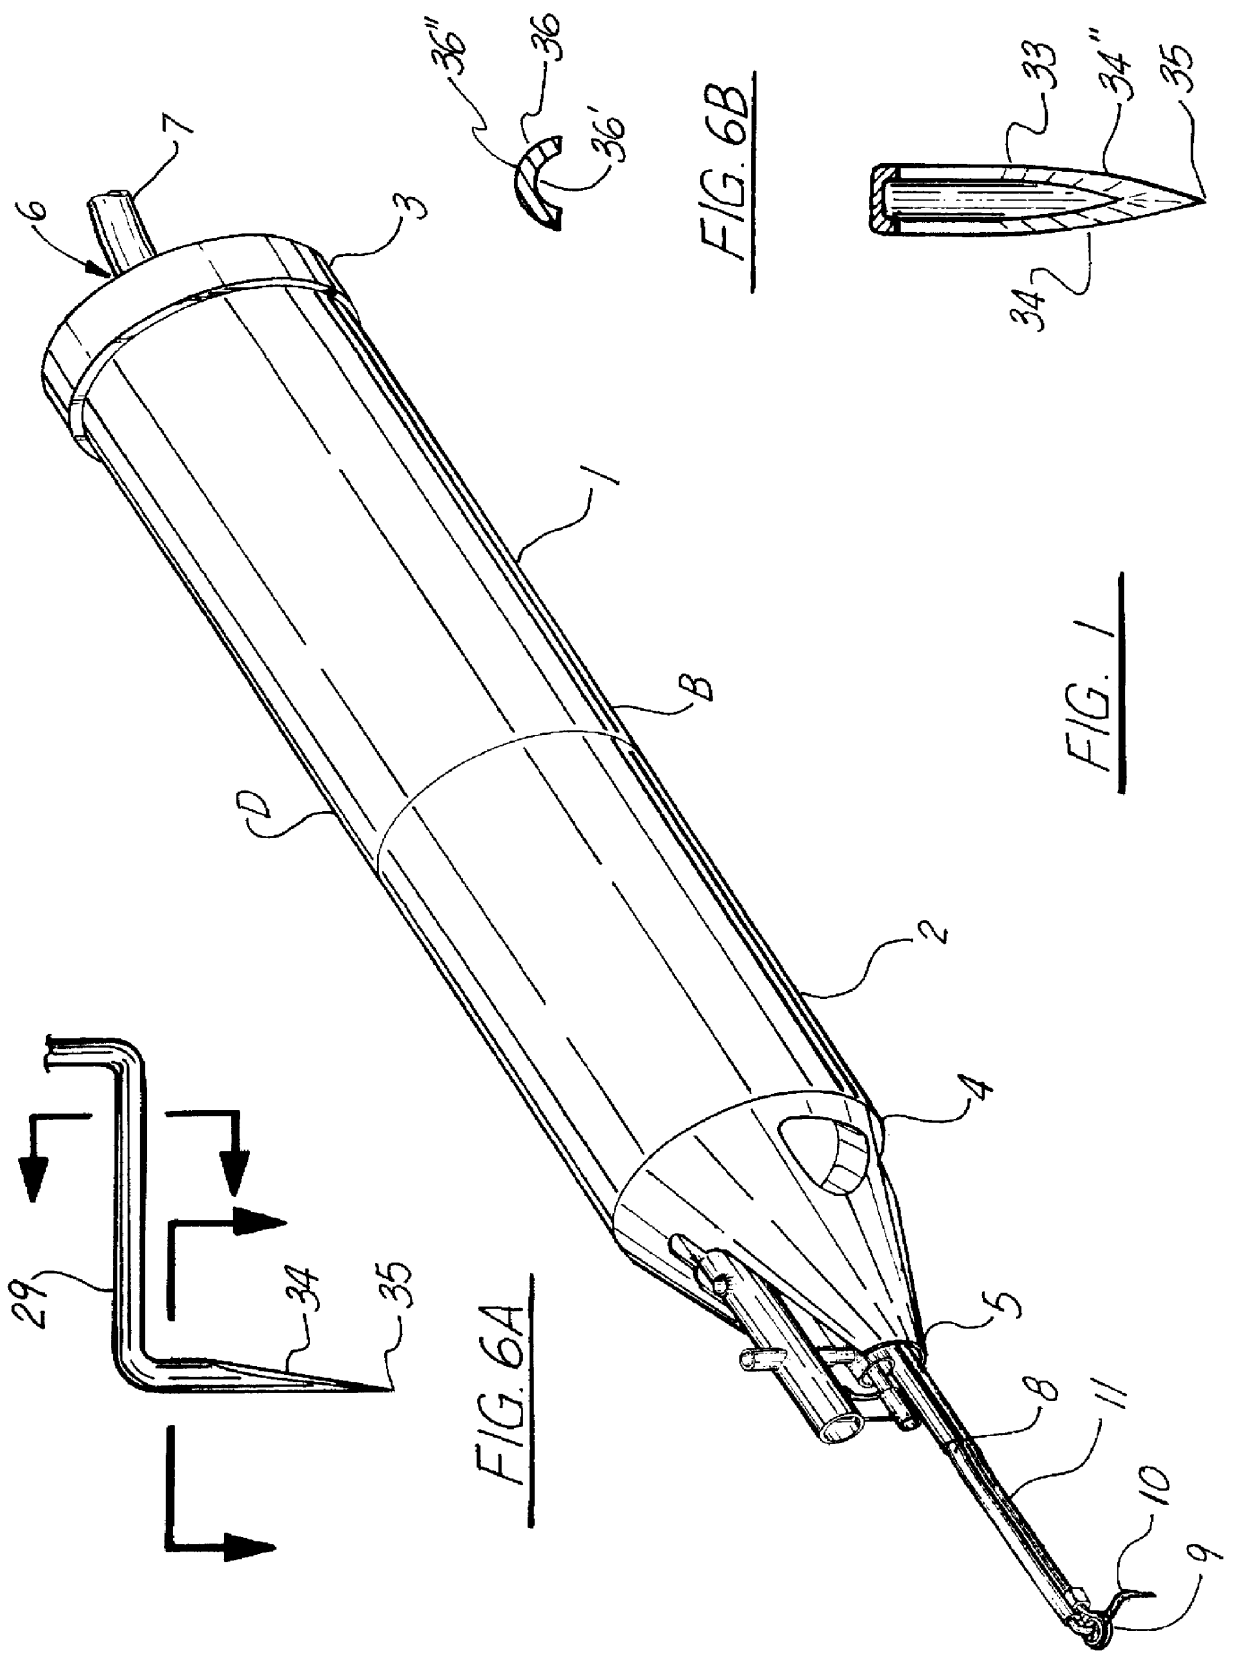 Capsulectomy device and method therefore